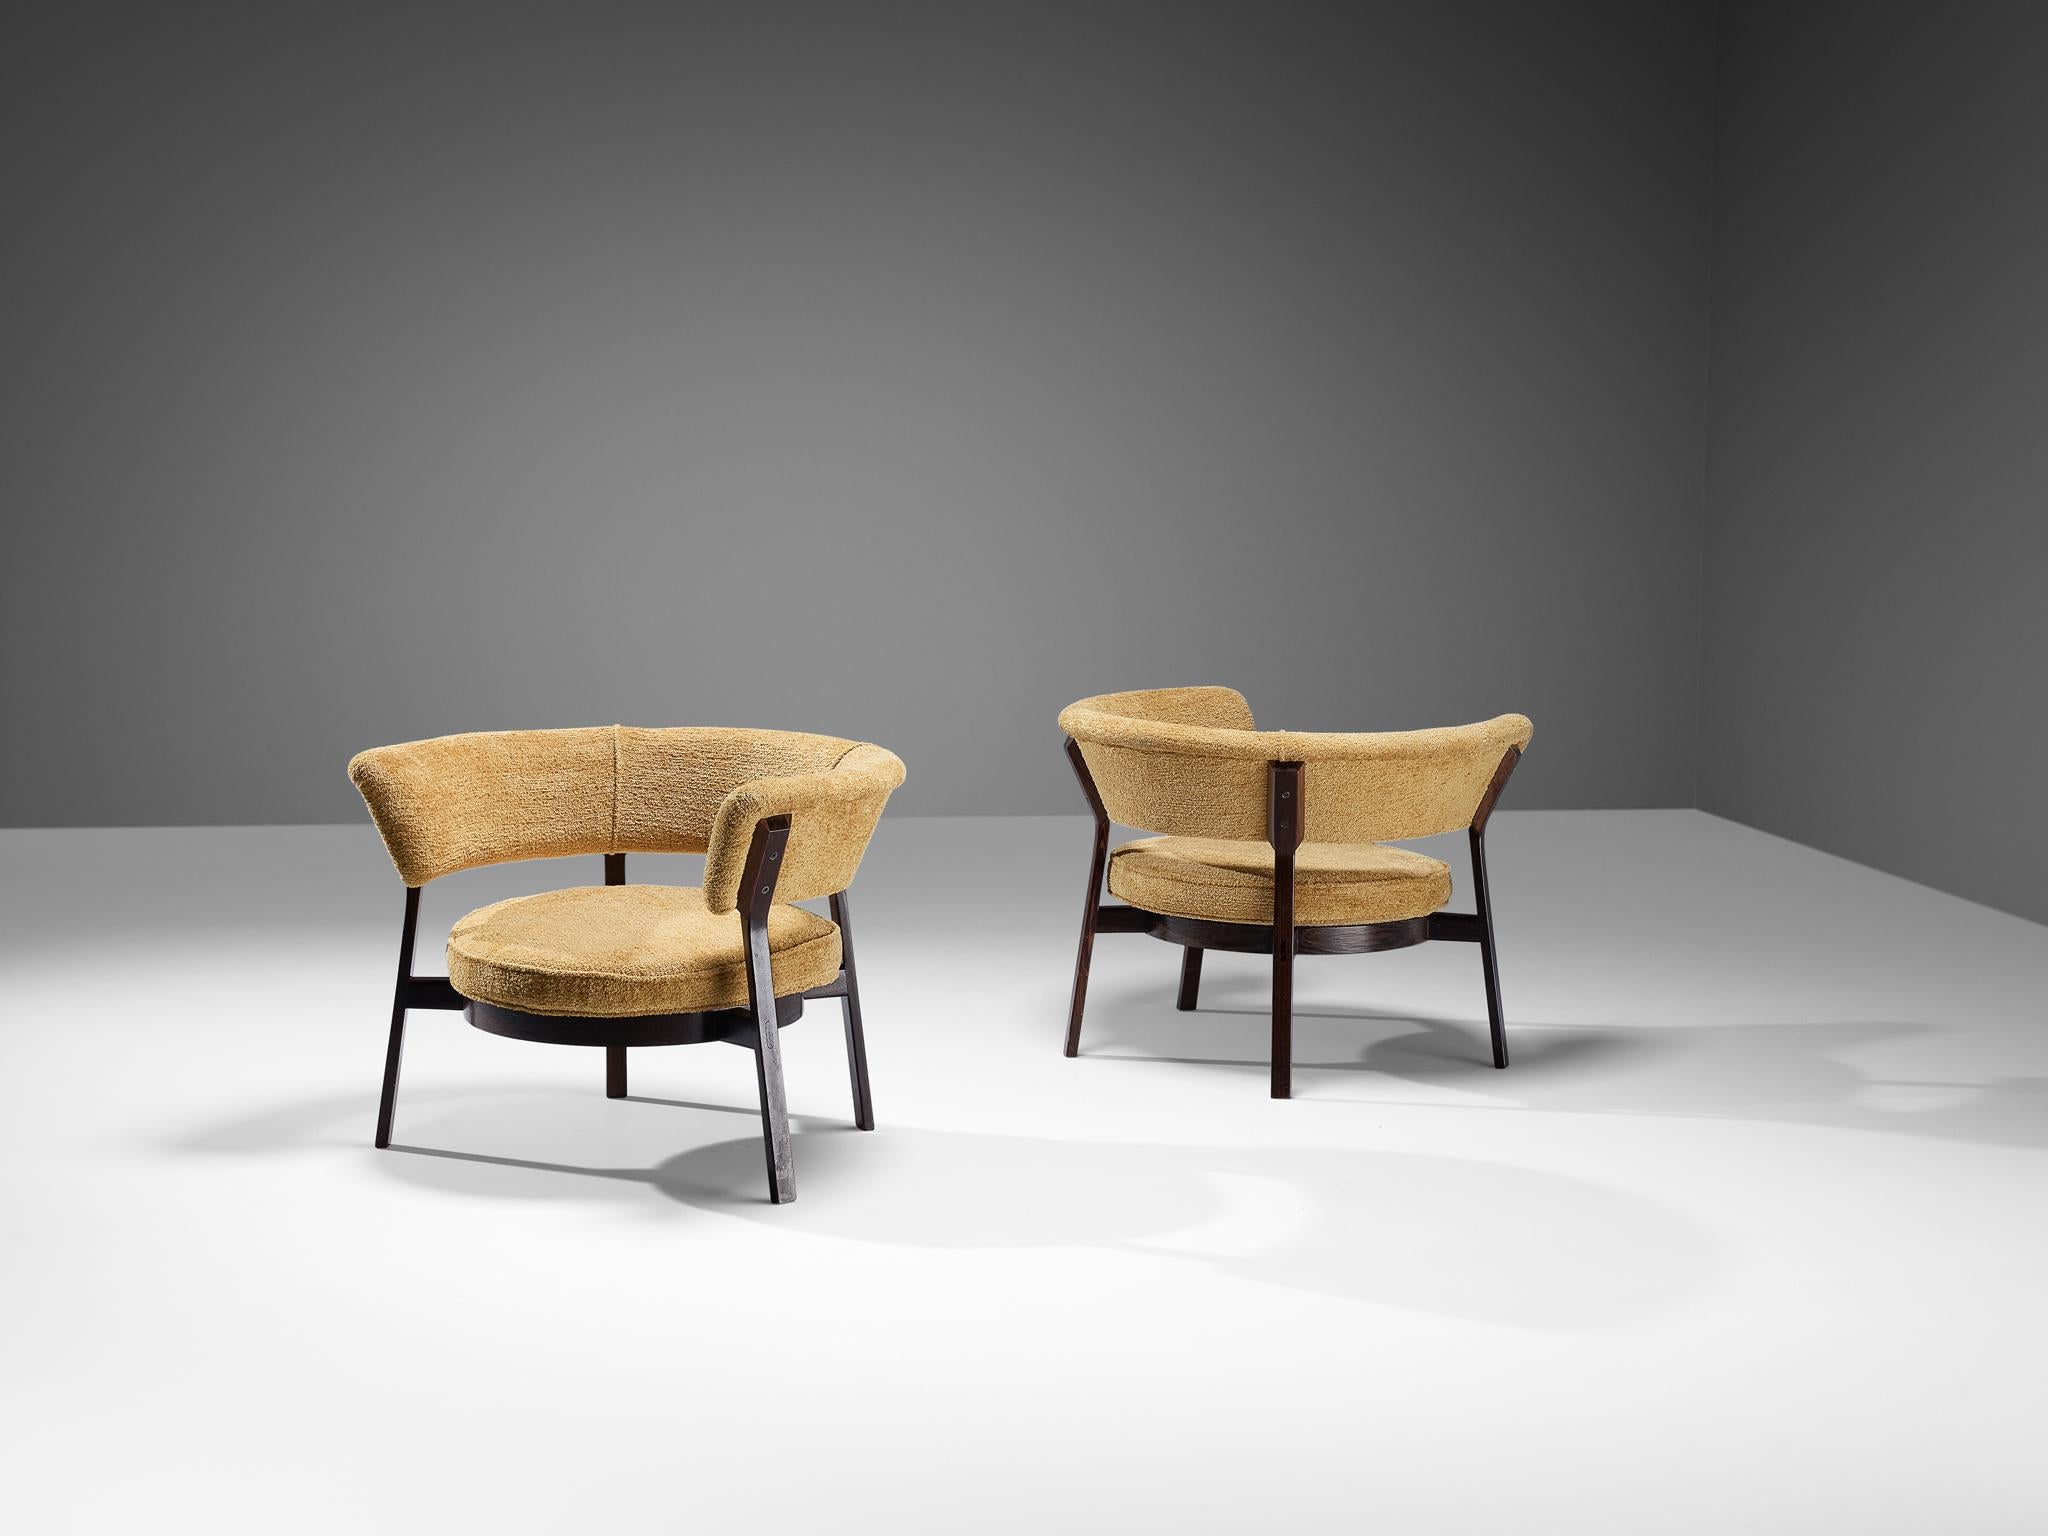 Eugenio Gerli for Tecno, pair of armchairs, model 'P28', wengé, fabric, Italy, 1958

Eugenio Gerli designed these lounge chairs model 'P28' for the Italian furniture company Tecno in 1958. The frame is characterized by an open and clean construction